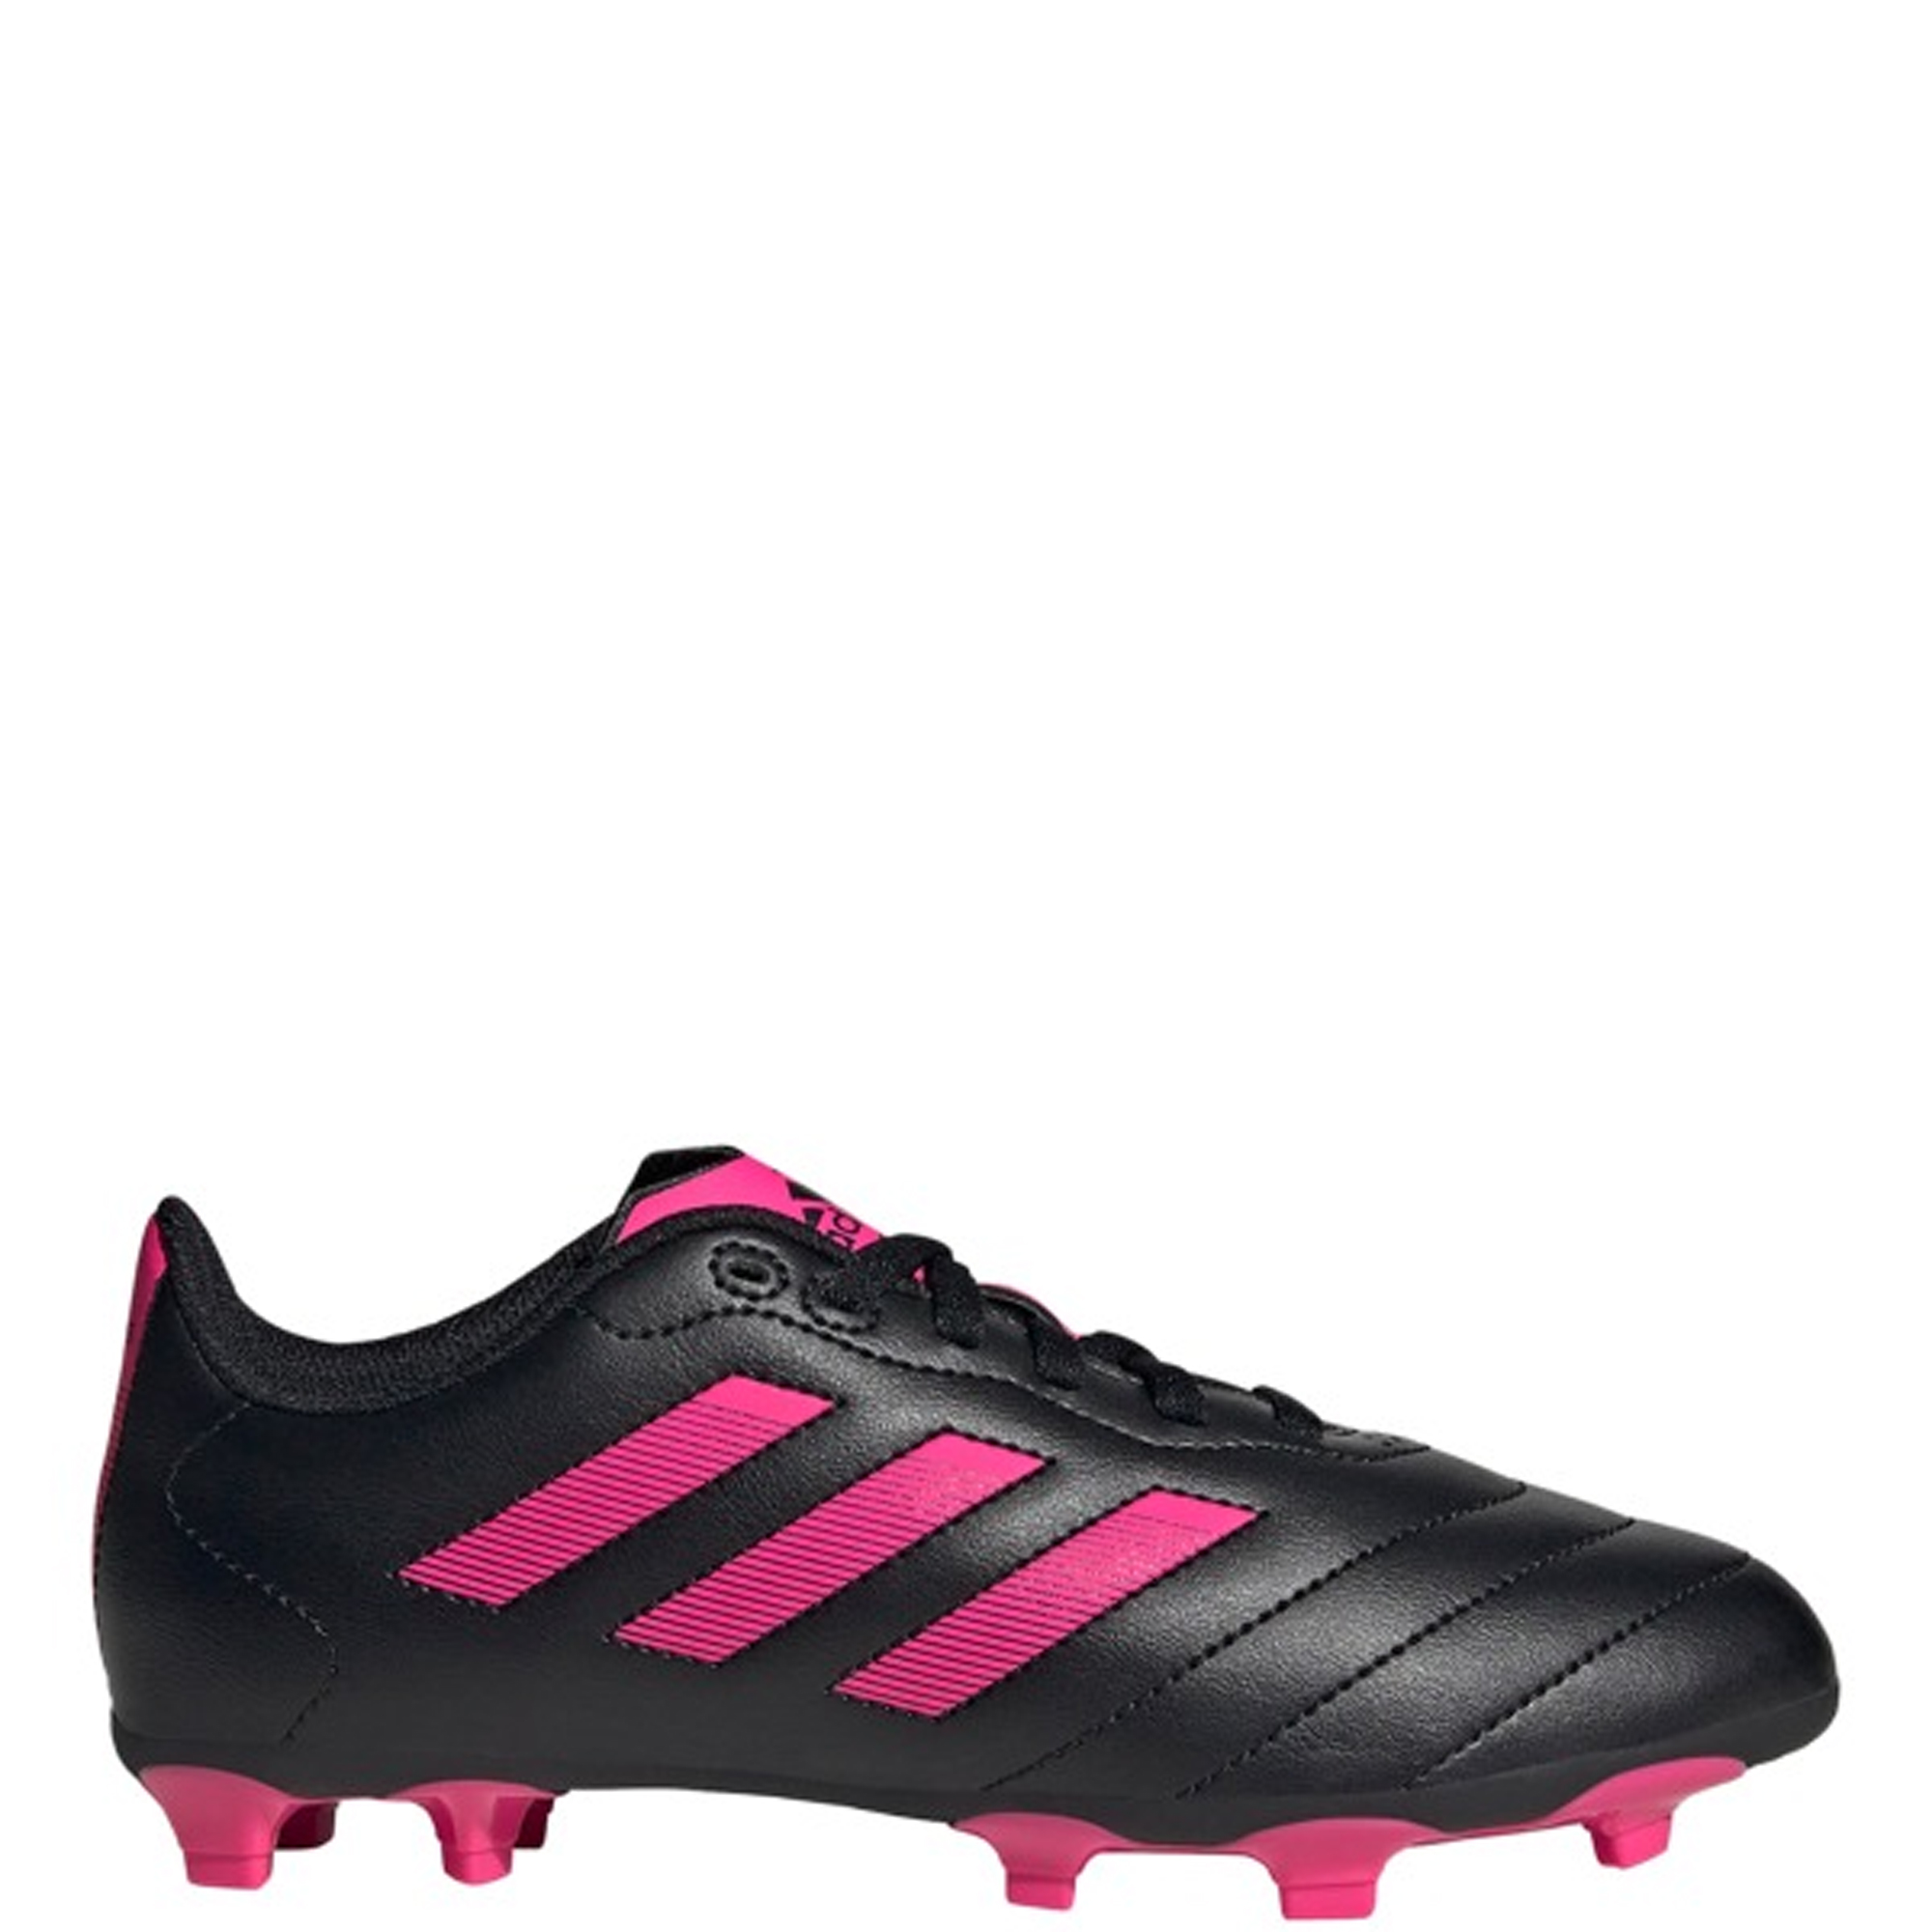 geeuwen bevel getuigenis Stefans Soccer - Wisconsin - adidas Youth Goletto FG Soccer Cleats - Black  / Pink